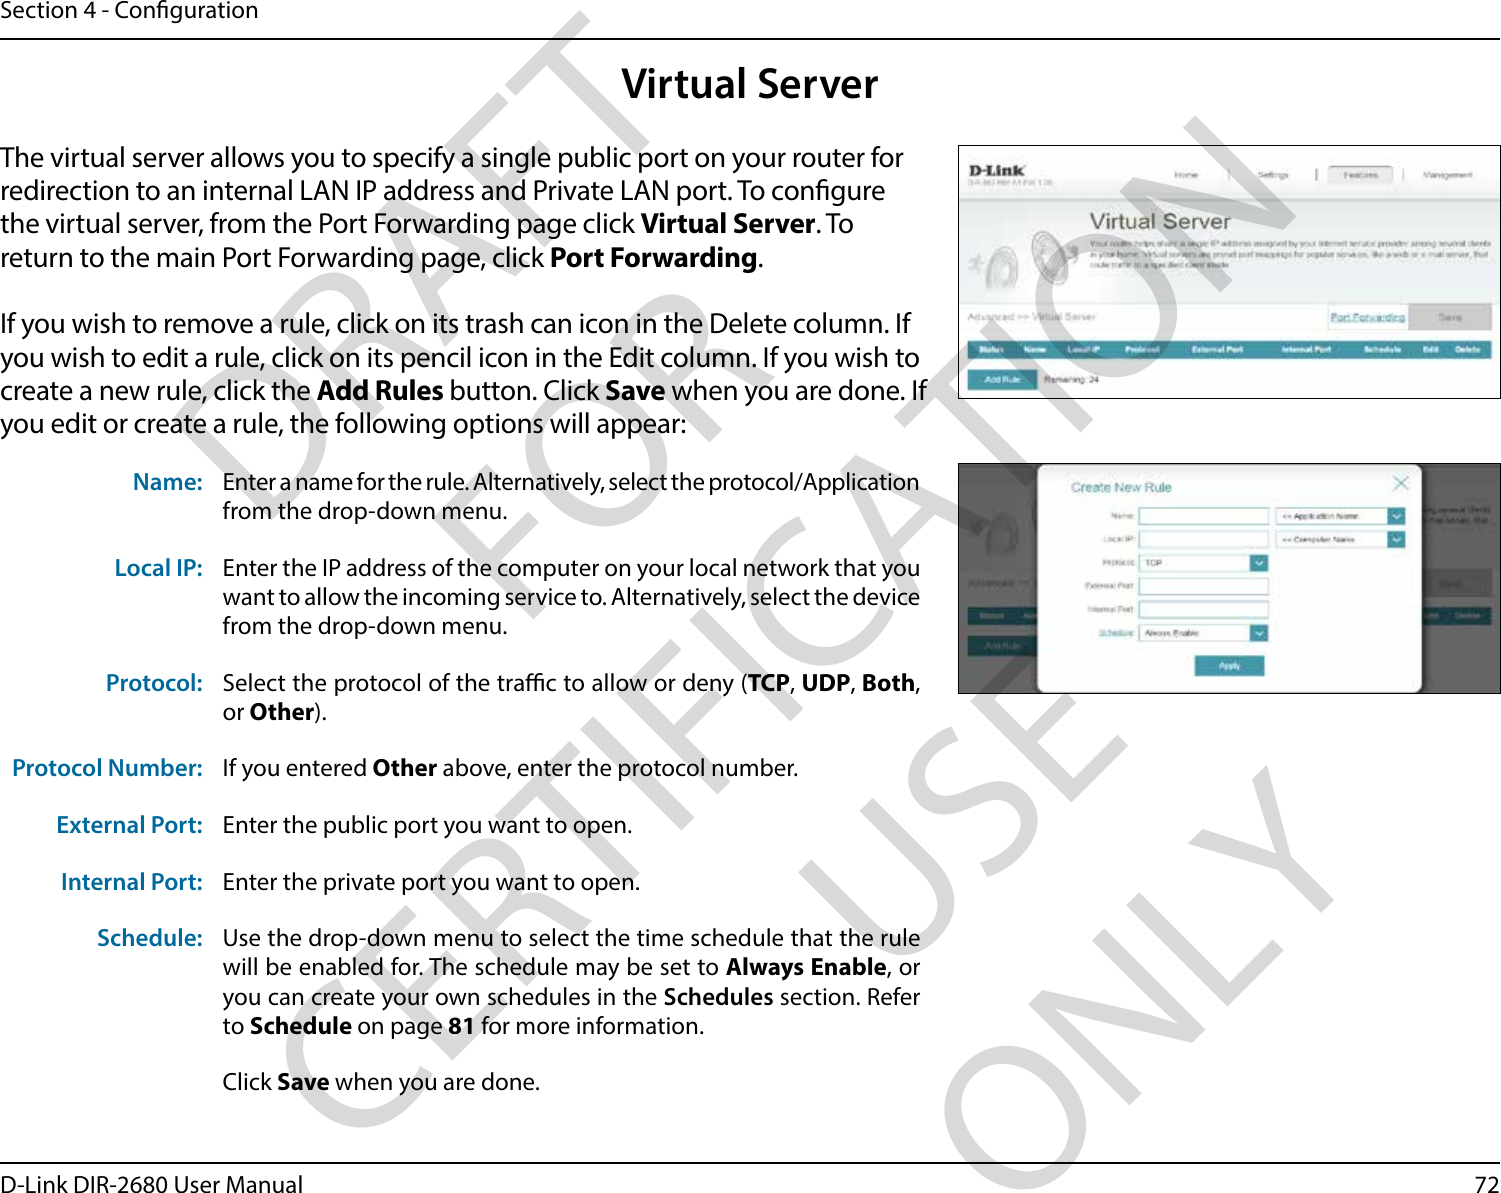 72D-Link DIR-2680 User ManualSection 4 - CongurationVirtual ServerThe virtual server allows you to specify a single public port on your router for redirection to an internal LAN IP address and Private LAN port. To congure the virtual server, from the Port Forwarding page click Virtual Server. To return to the main Port Forwarding page, click Port Forwarding.If you wish to remove a rule, click on its trash can icon in the Delete column. If you wish to edit a rule, click on its pencil icon in the Edit column. If you wish to create a new rule, click the Add Rules button. Click Save when you are done. If you edit or create a rule, the following options will appear:Name: Enter a name for the rule. Alternatively, select the protocol/Application from the drop-down menu.Local IP: Enter the IP address of the computer on your local network that you want to allow the incoming service to. Alternatively, select the device from the drop-down menu.Protocol: Select the protocol of the trac to allow or deny (TCP, UDP, Both, or Other).Protocol Number: If you entered Other above, enter the protocol number.External Port: Enter the public port you want to open.Internal Port: Enter the private port you want to open.Schedule: Use the drop-down menu to select the time schedule that the rule will be enabled for. The schedule may be set to Always Enable, or you can create your own schedules in the Schedules section. Refer to Schedule on page 81 for more information.Click Save when you are done.DRAFT FOR CERTIFICATION USE ONLY